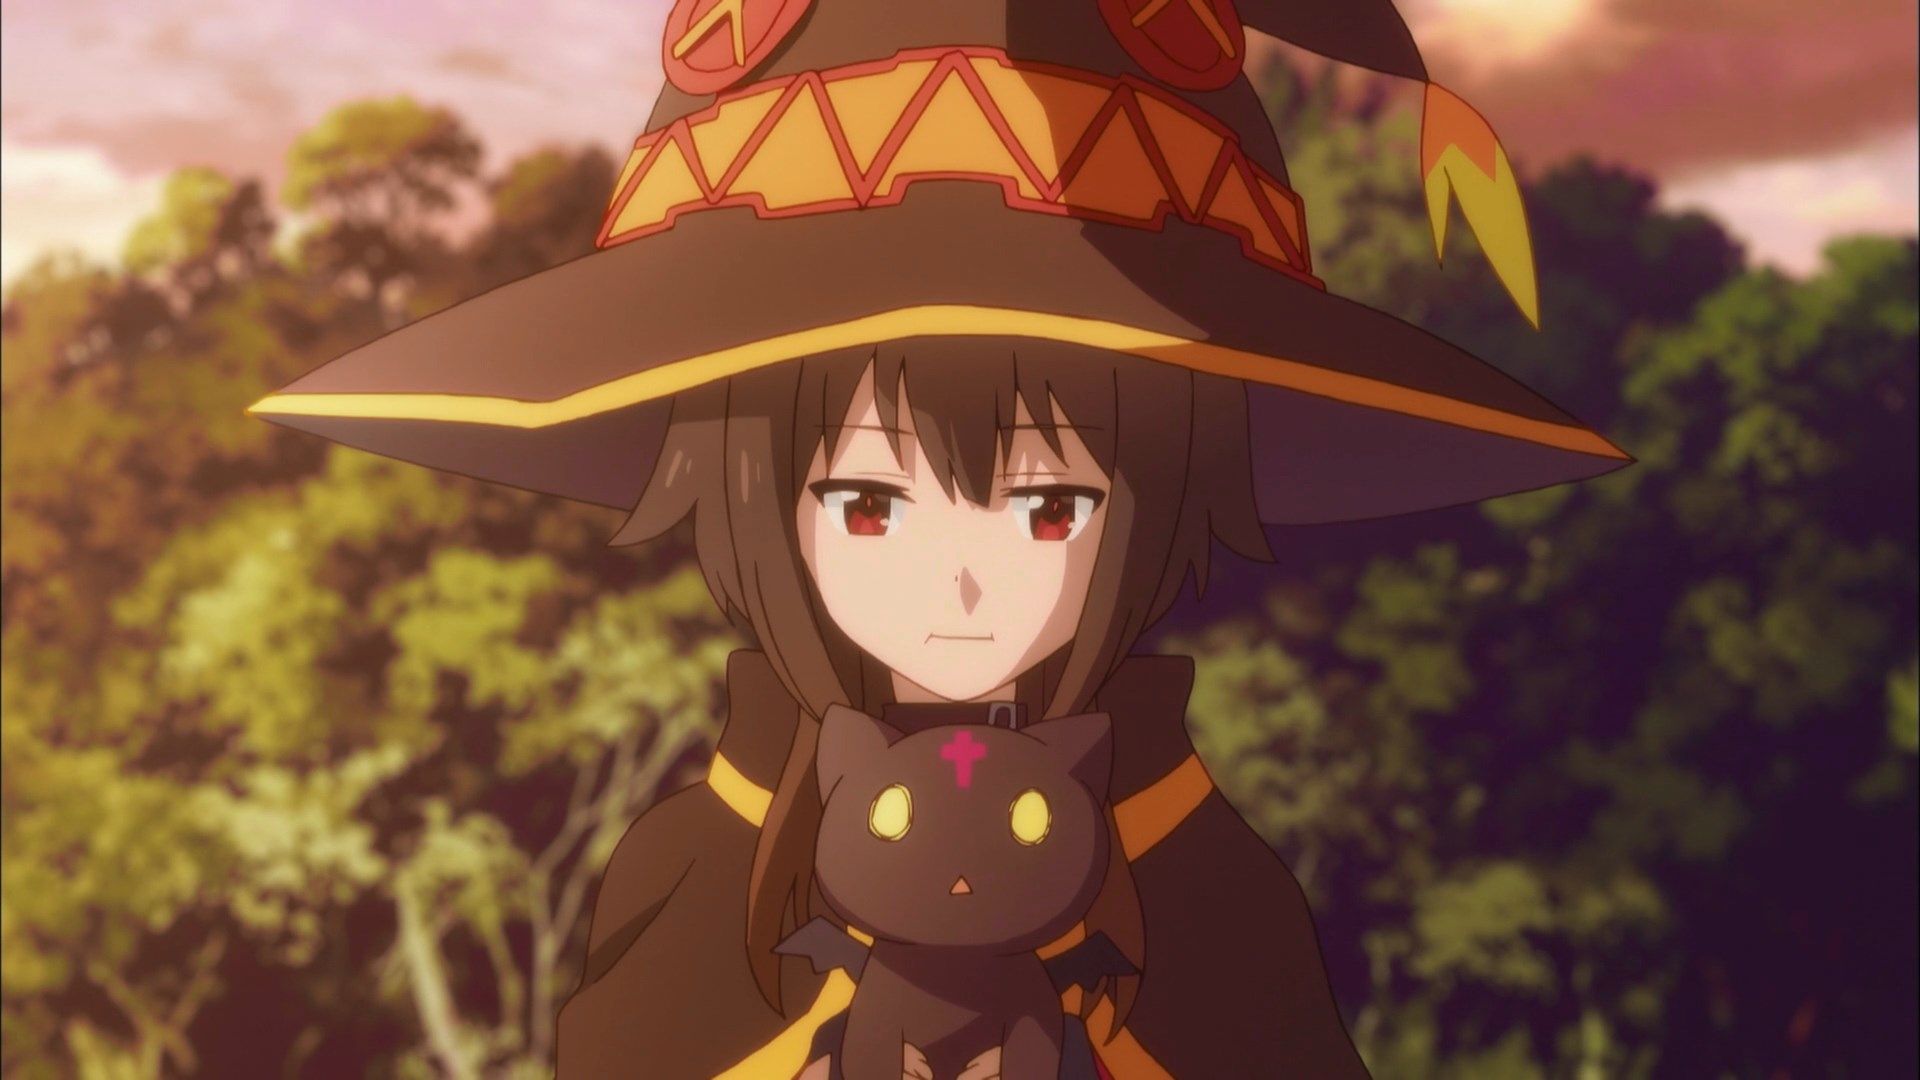 Megumin 1920x1080 posted by Michelle Tremblay.